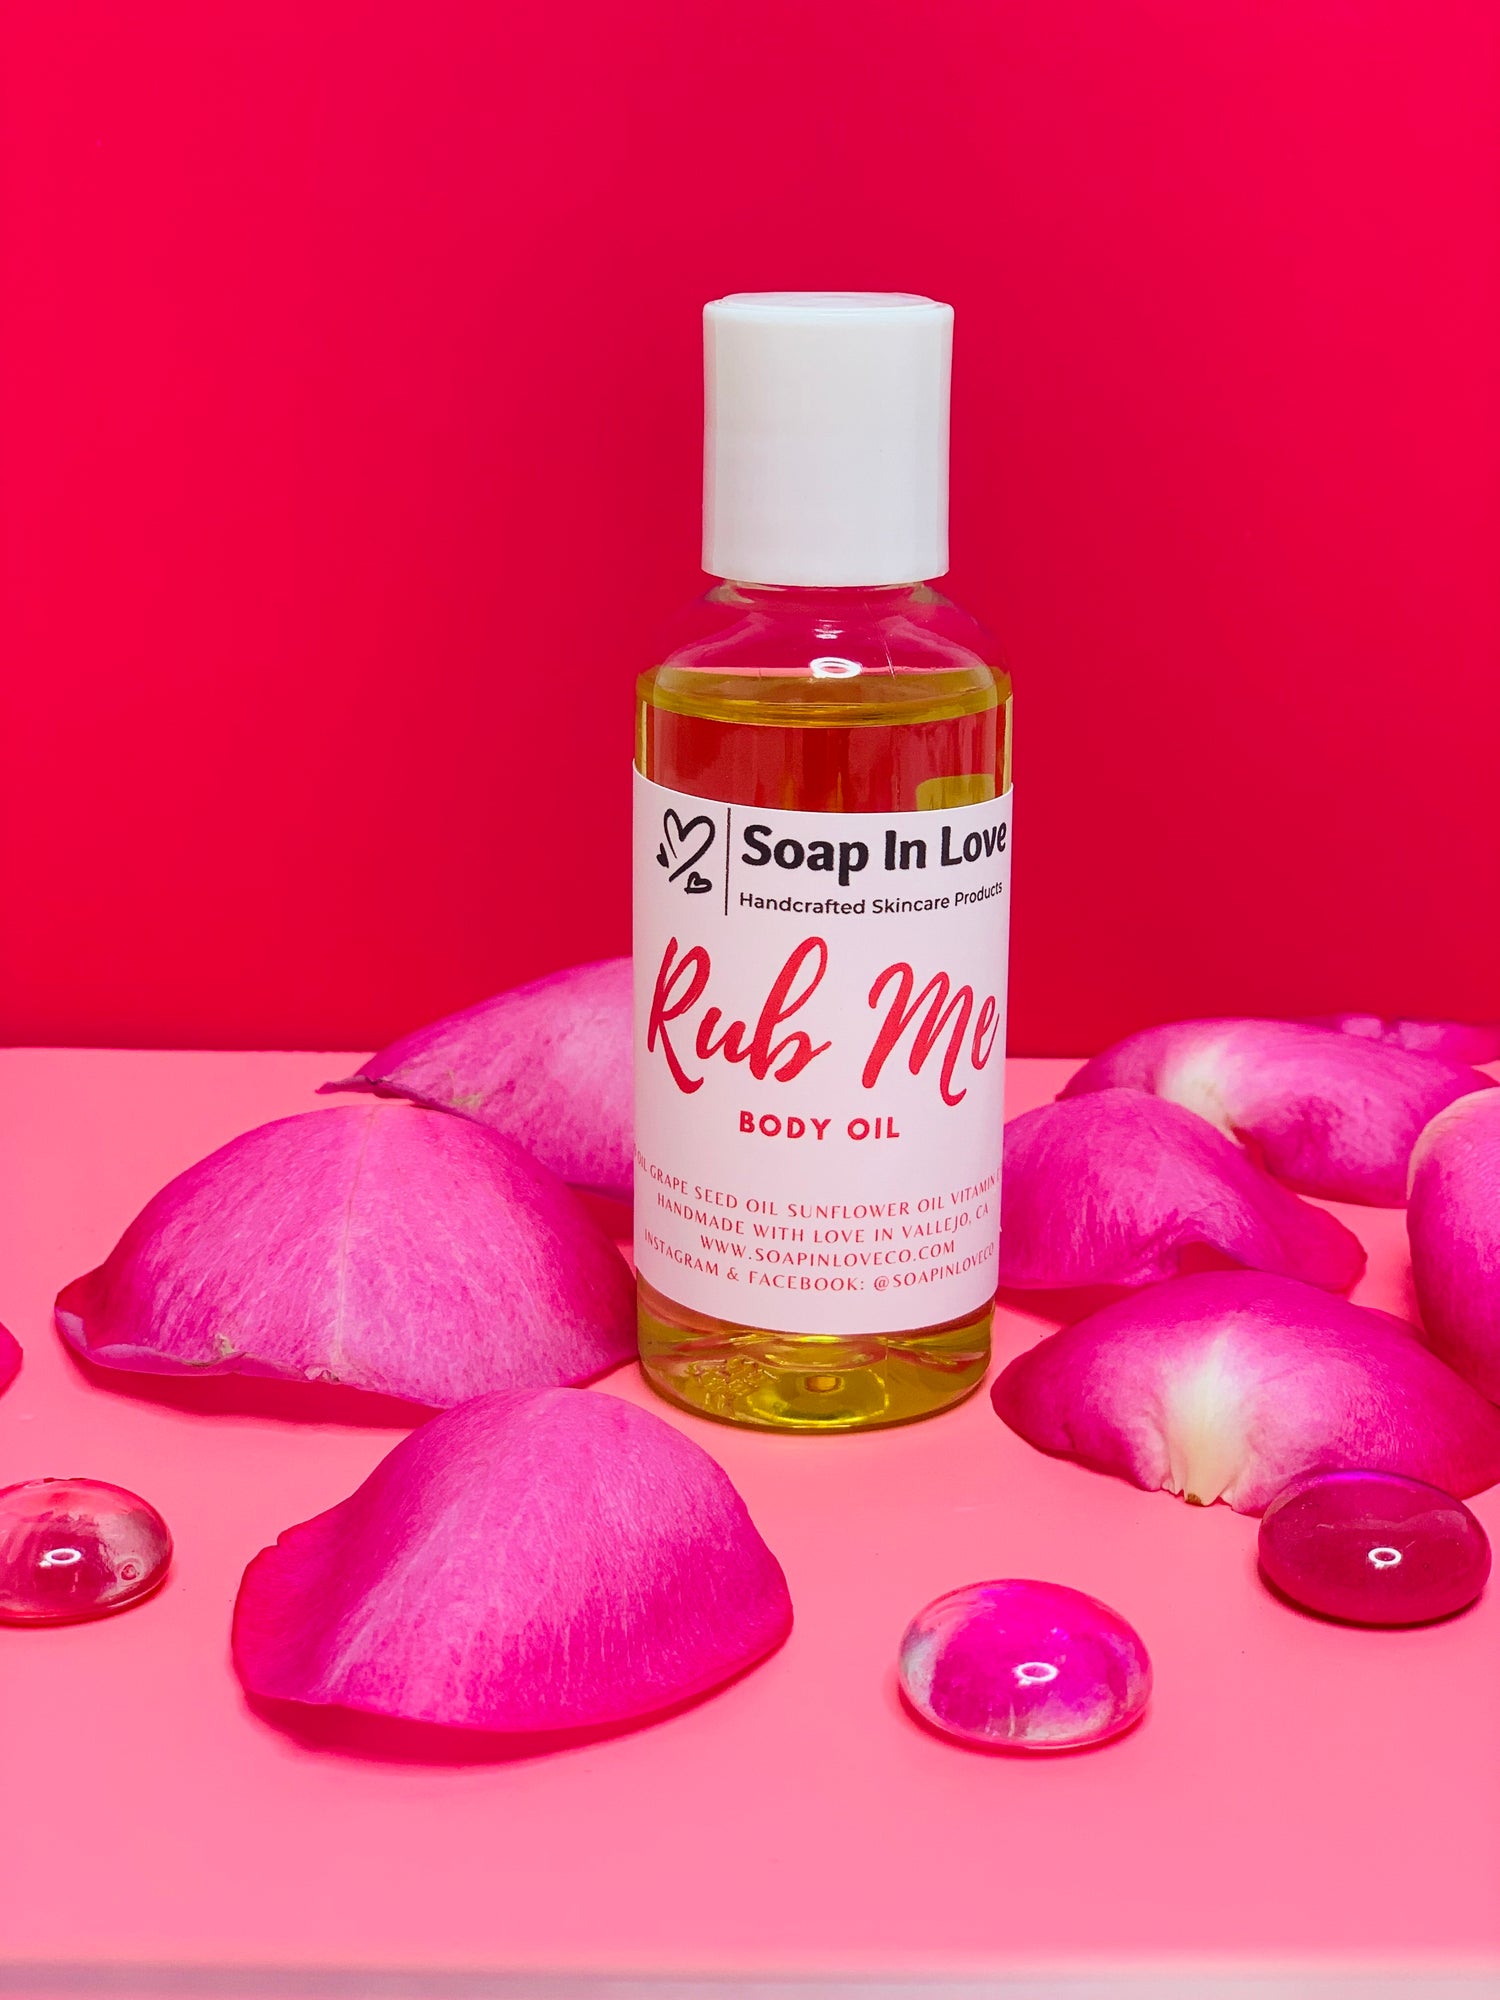 “Pink Sugar” Luxe Body Oil